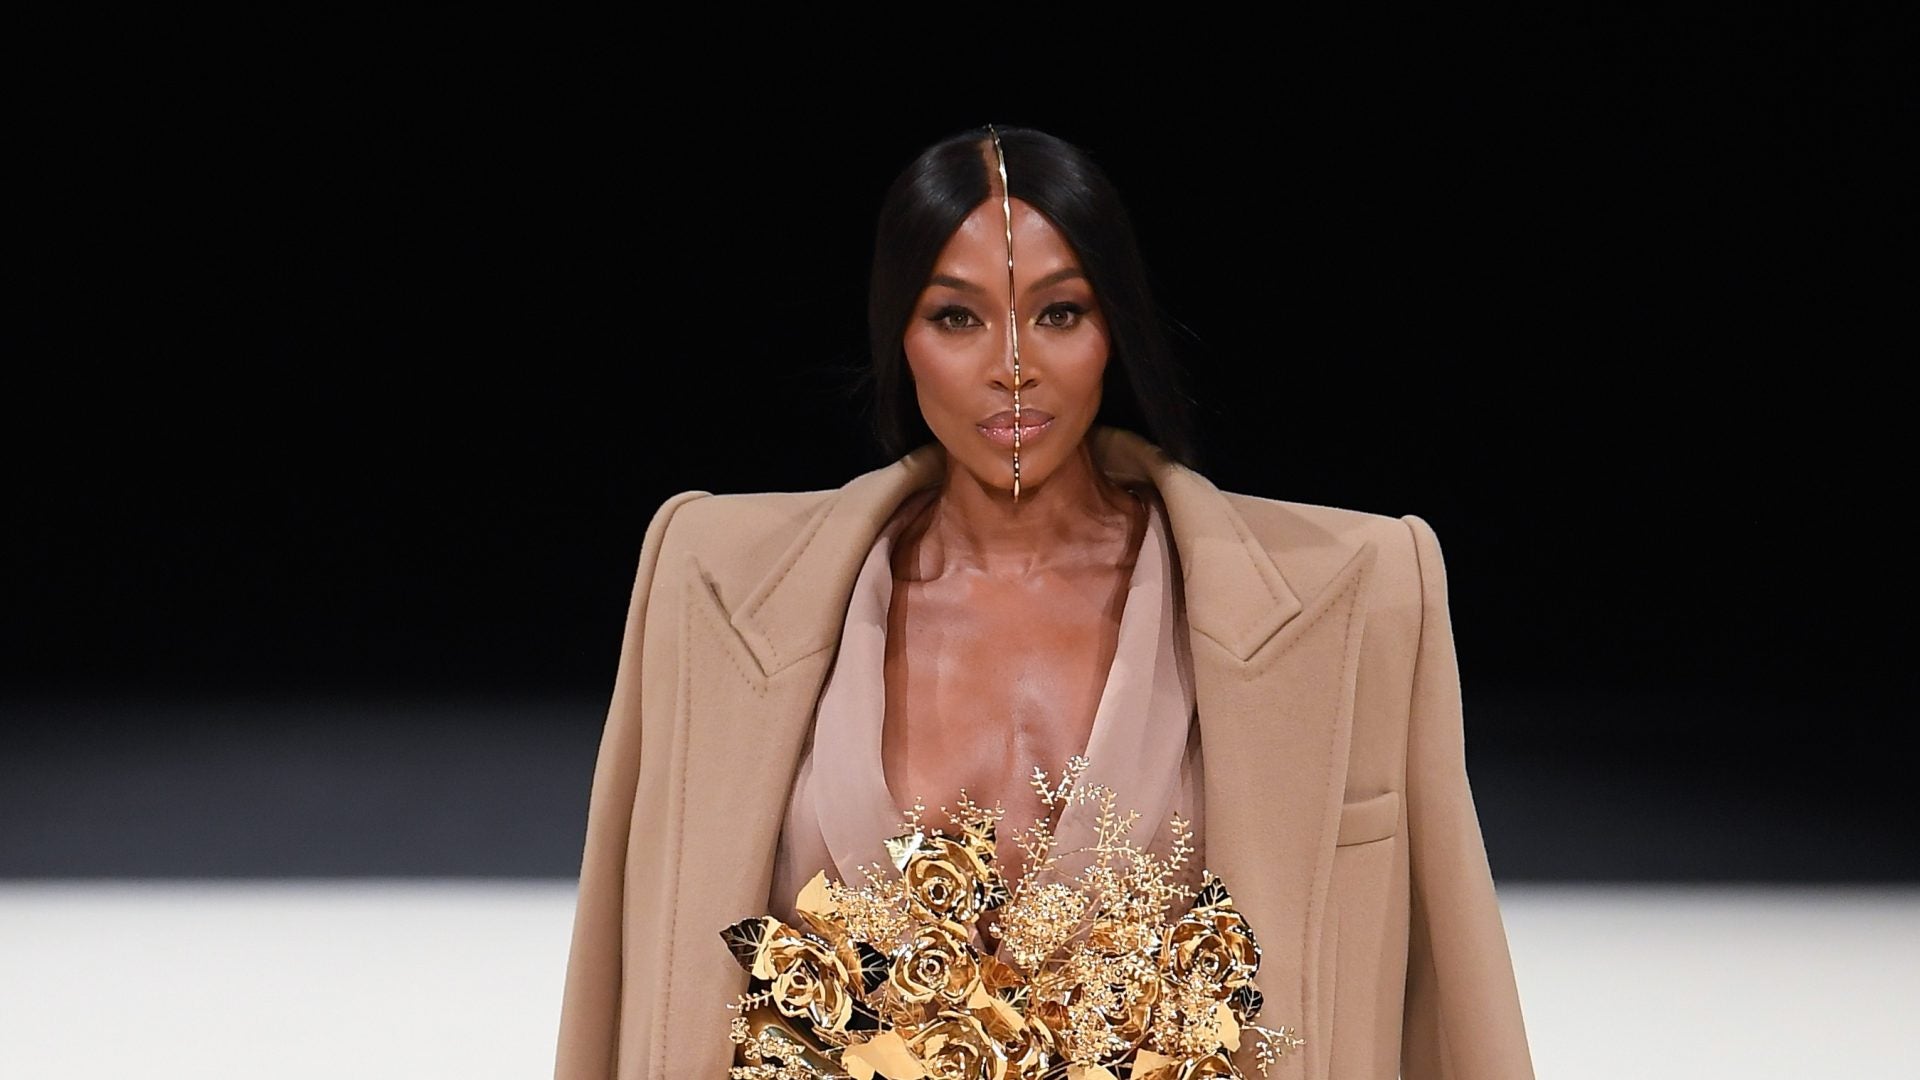 In Case You Missed It: Naomi Campbell Closes The Balmain Runway Show, And More